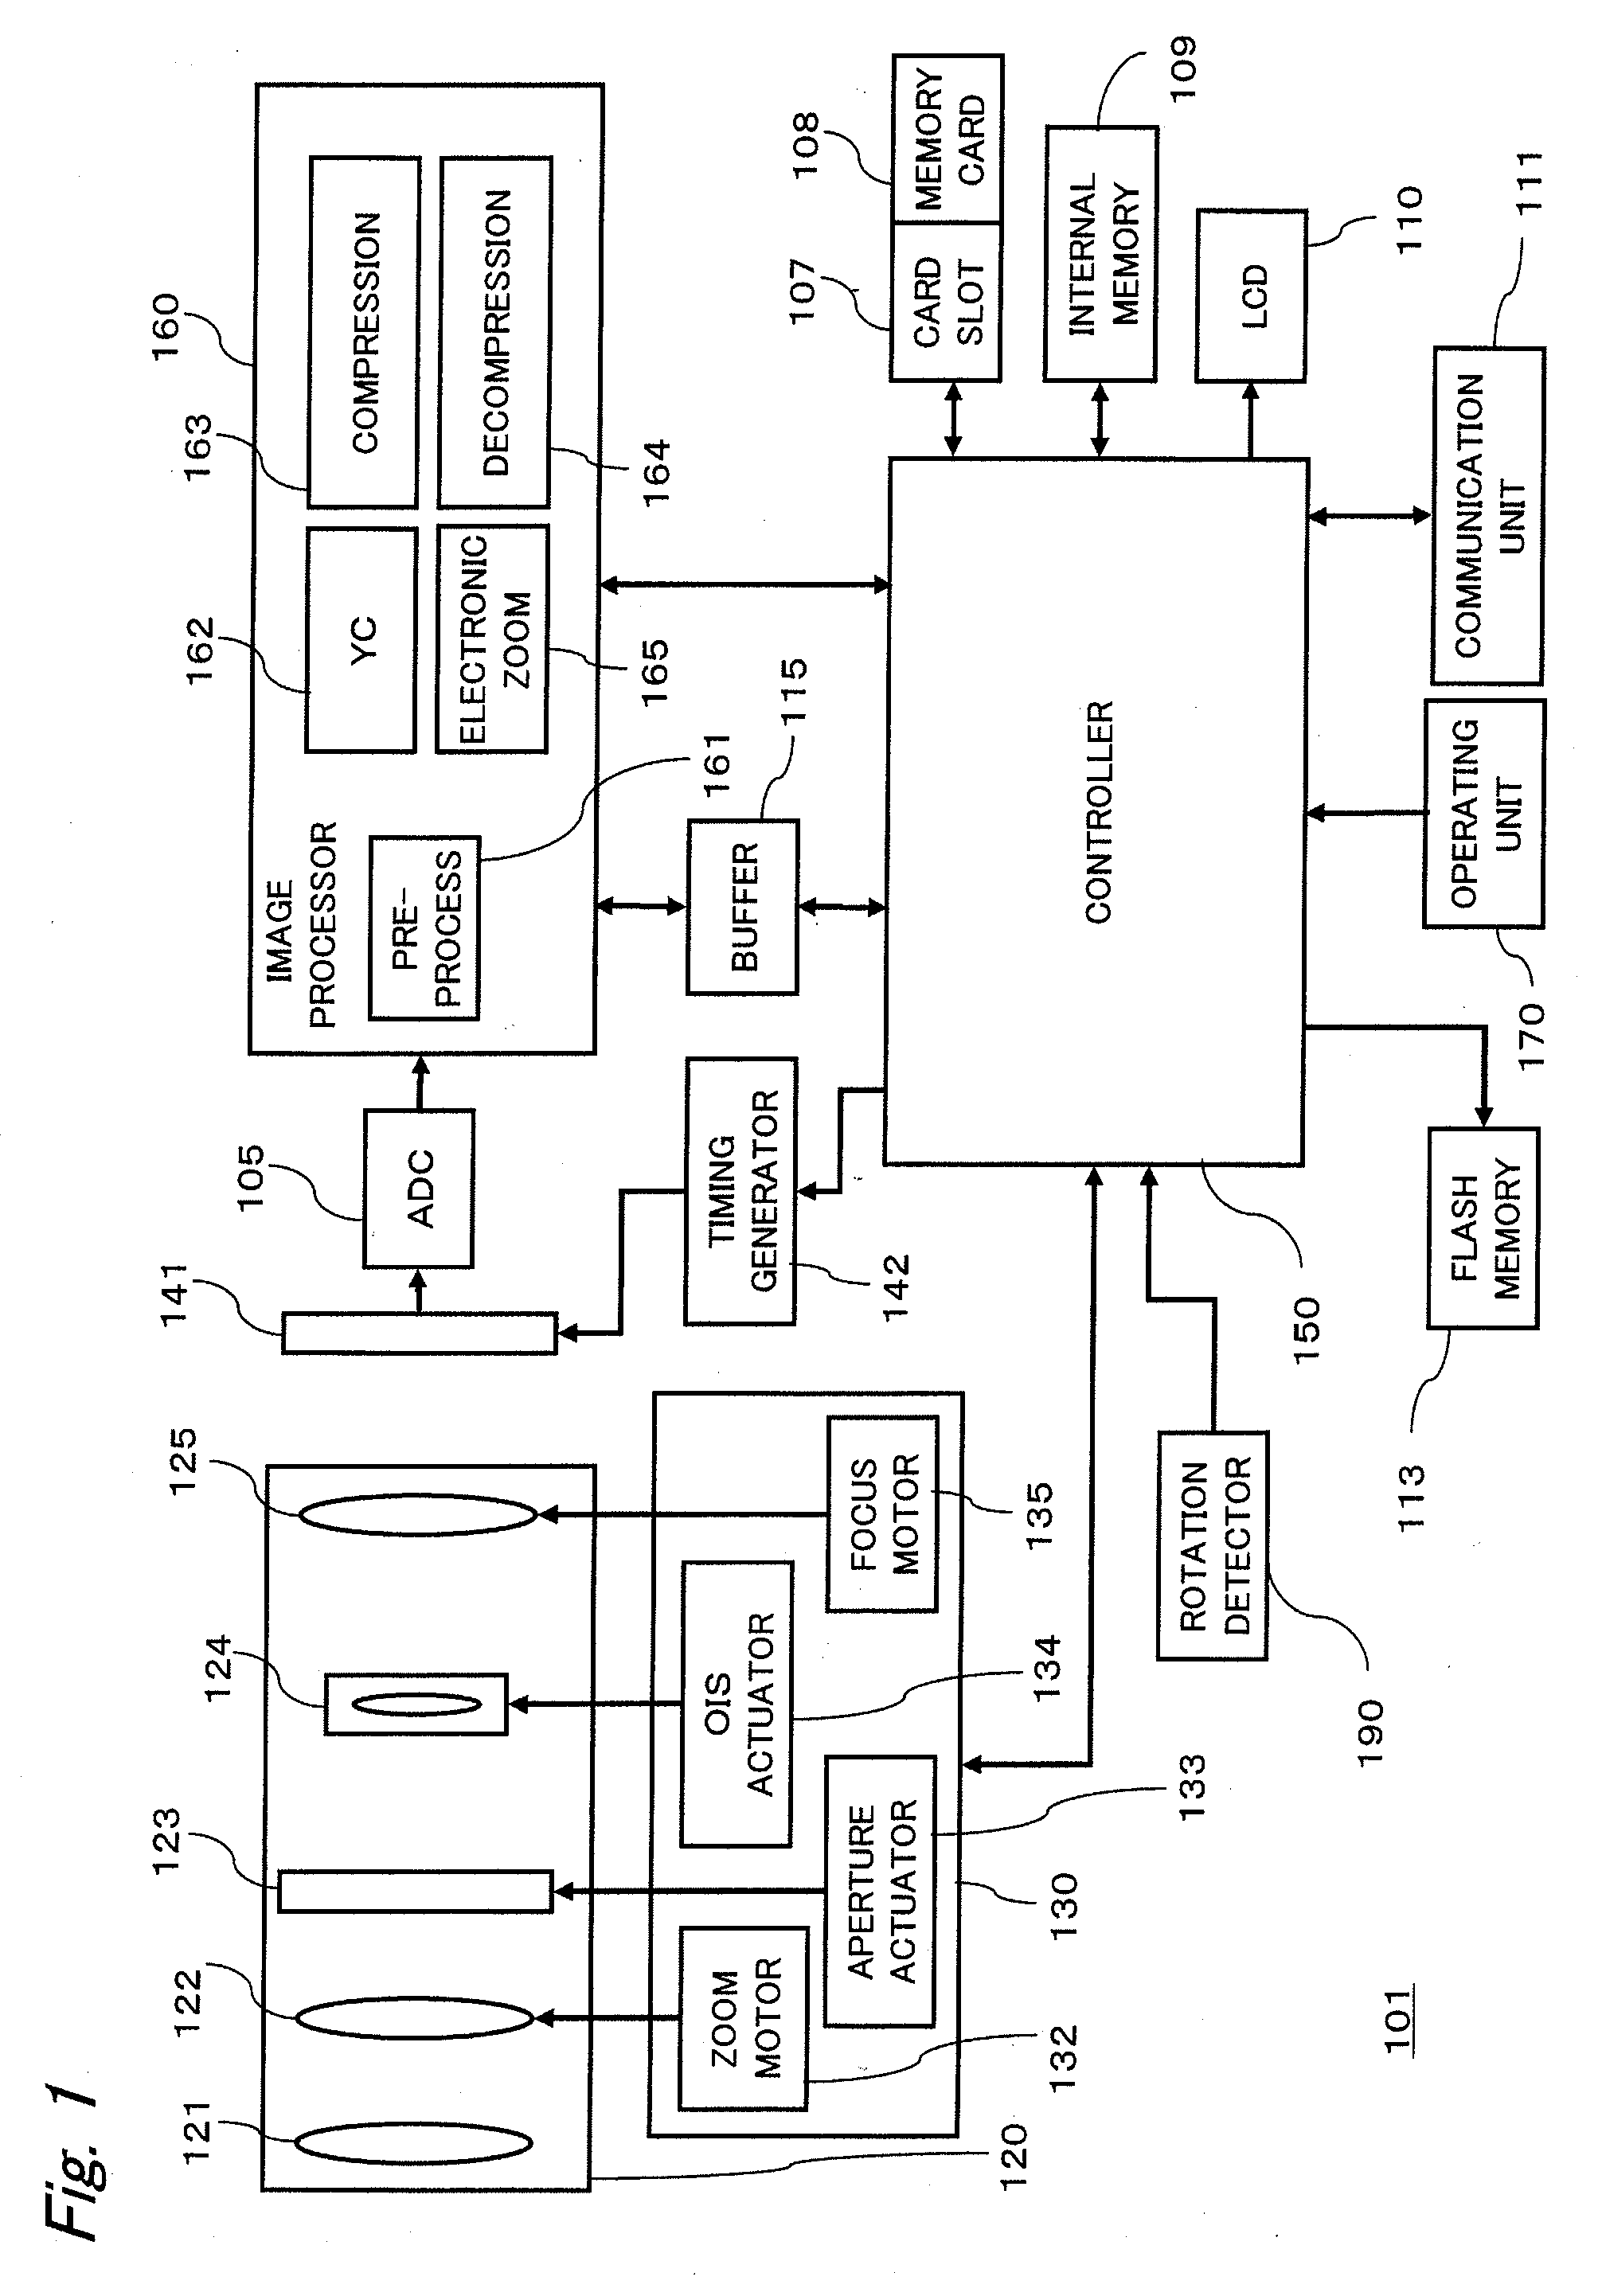 Image file reproduction apparatus and image data reproduction apparatus